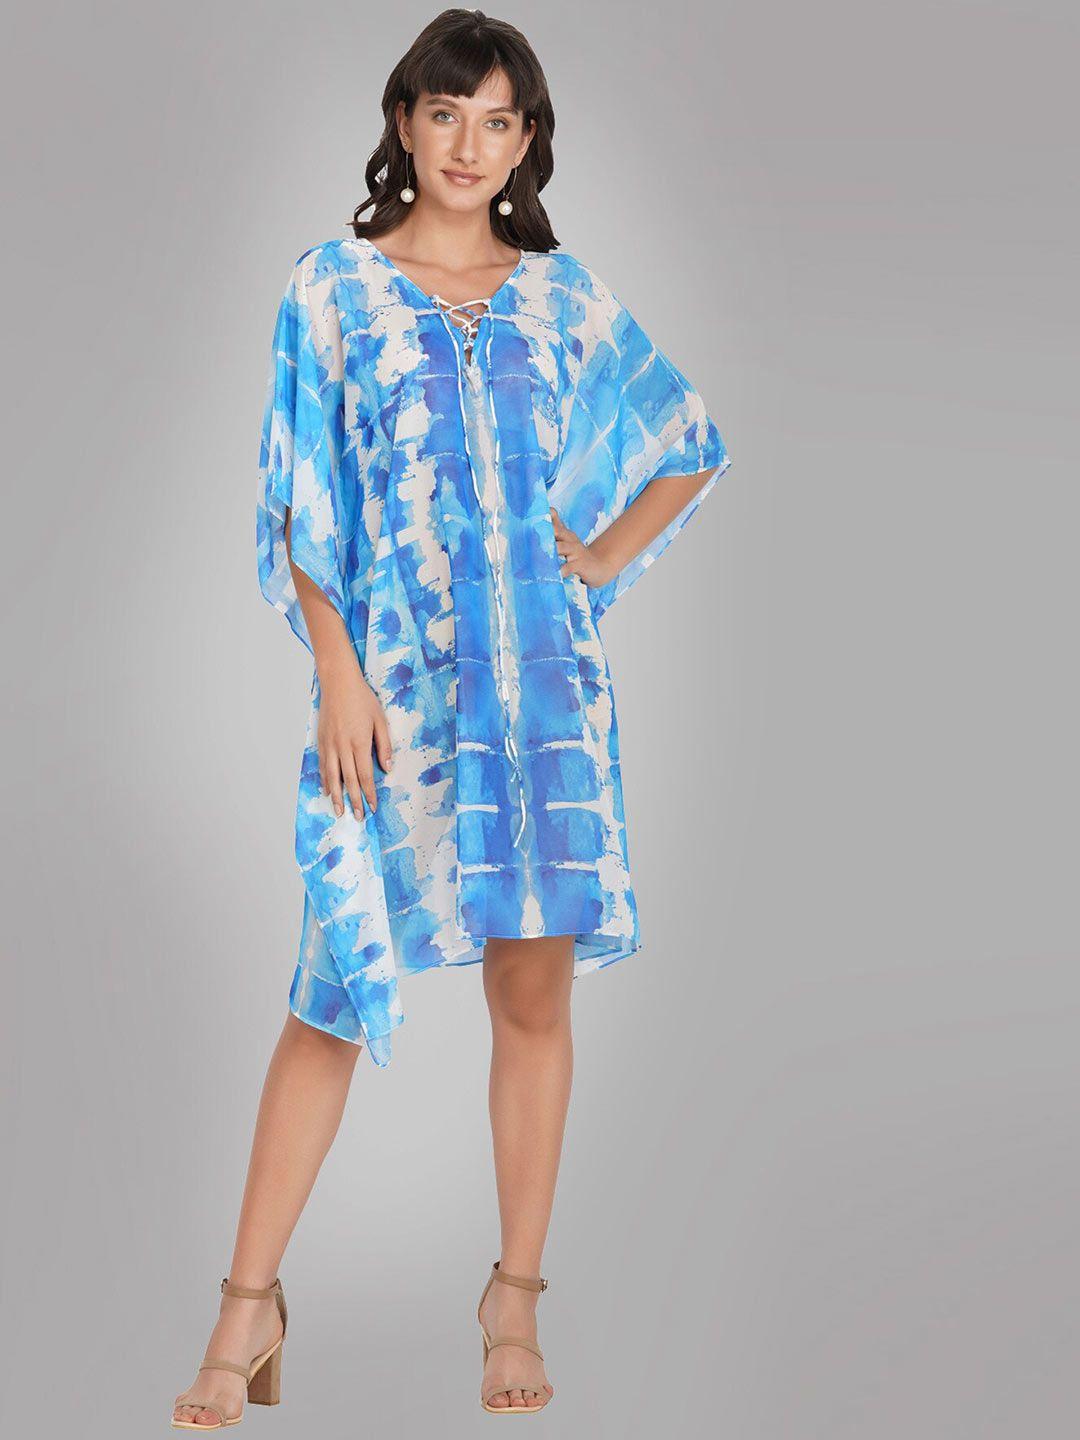 rajoria instyle multicoloured tie and dye dyed georgette ethnic kaftan dress